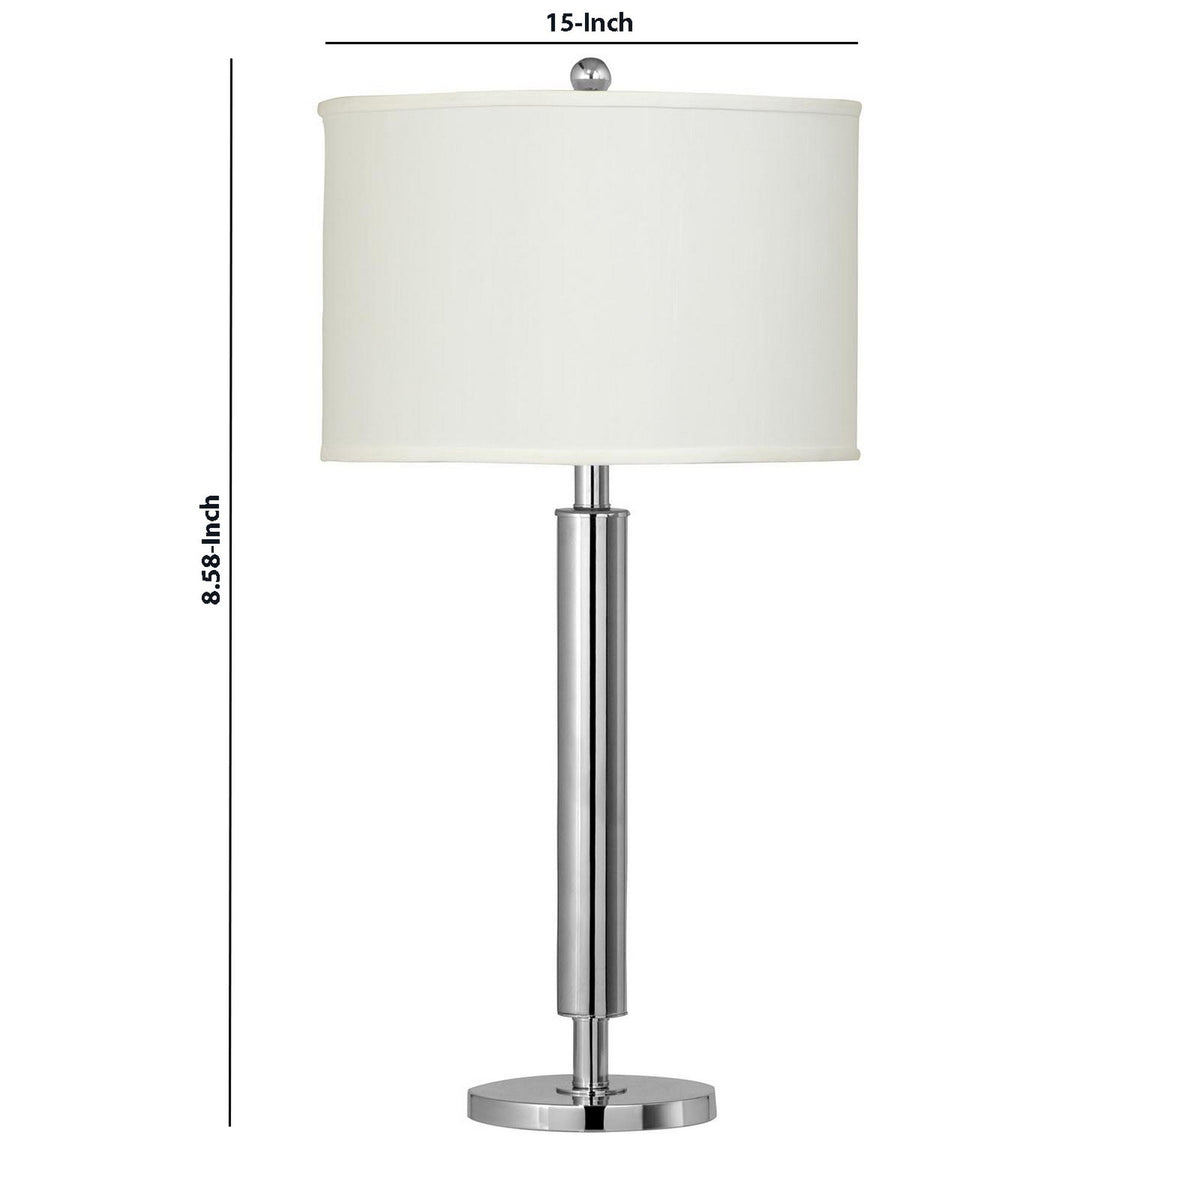 Metal Table Lamp with Tubular Support and Push Through Switch, Silver - BM220723